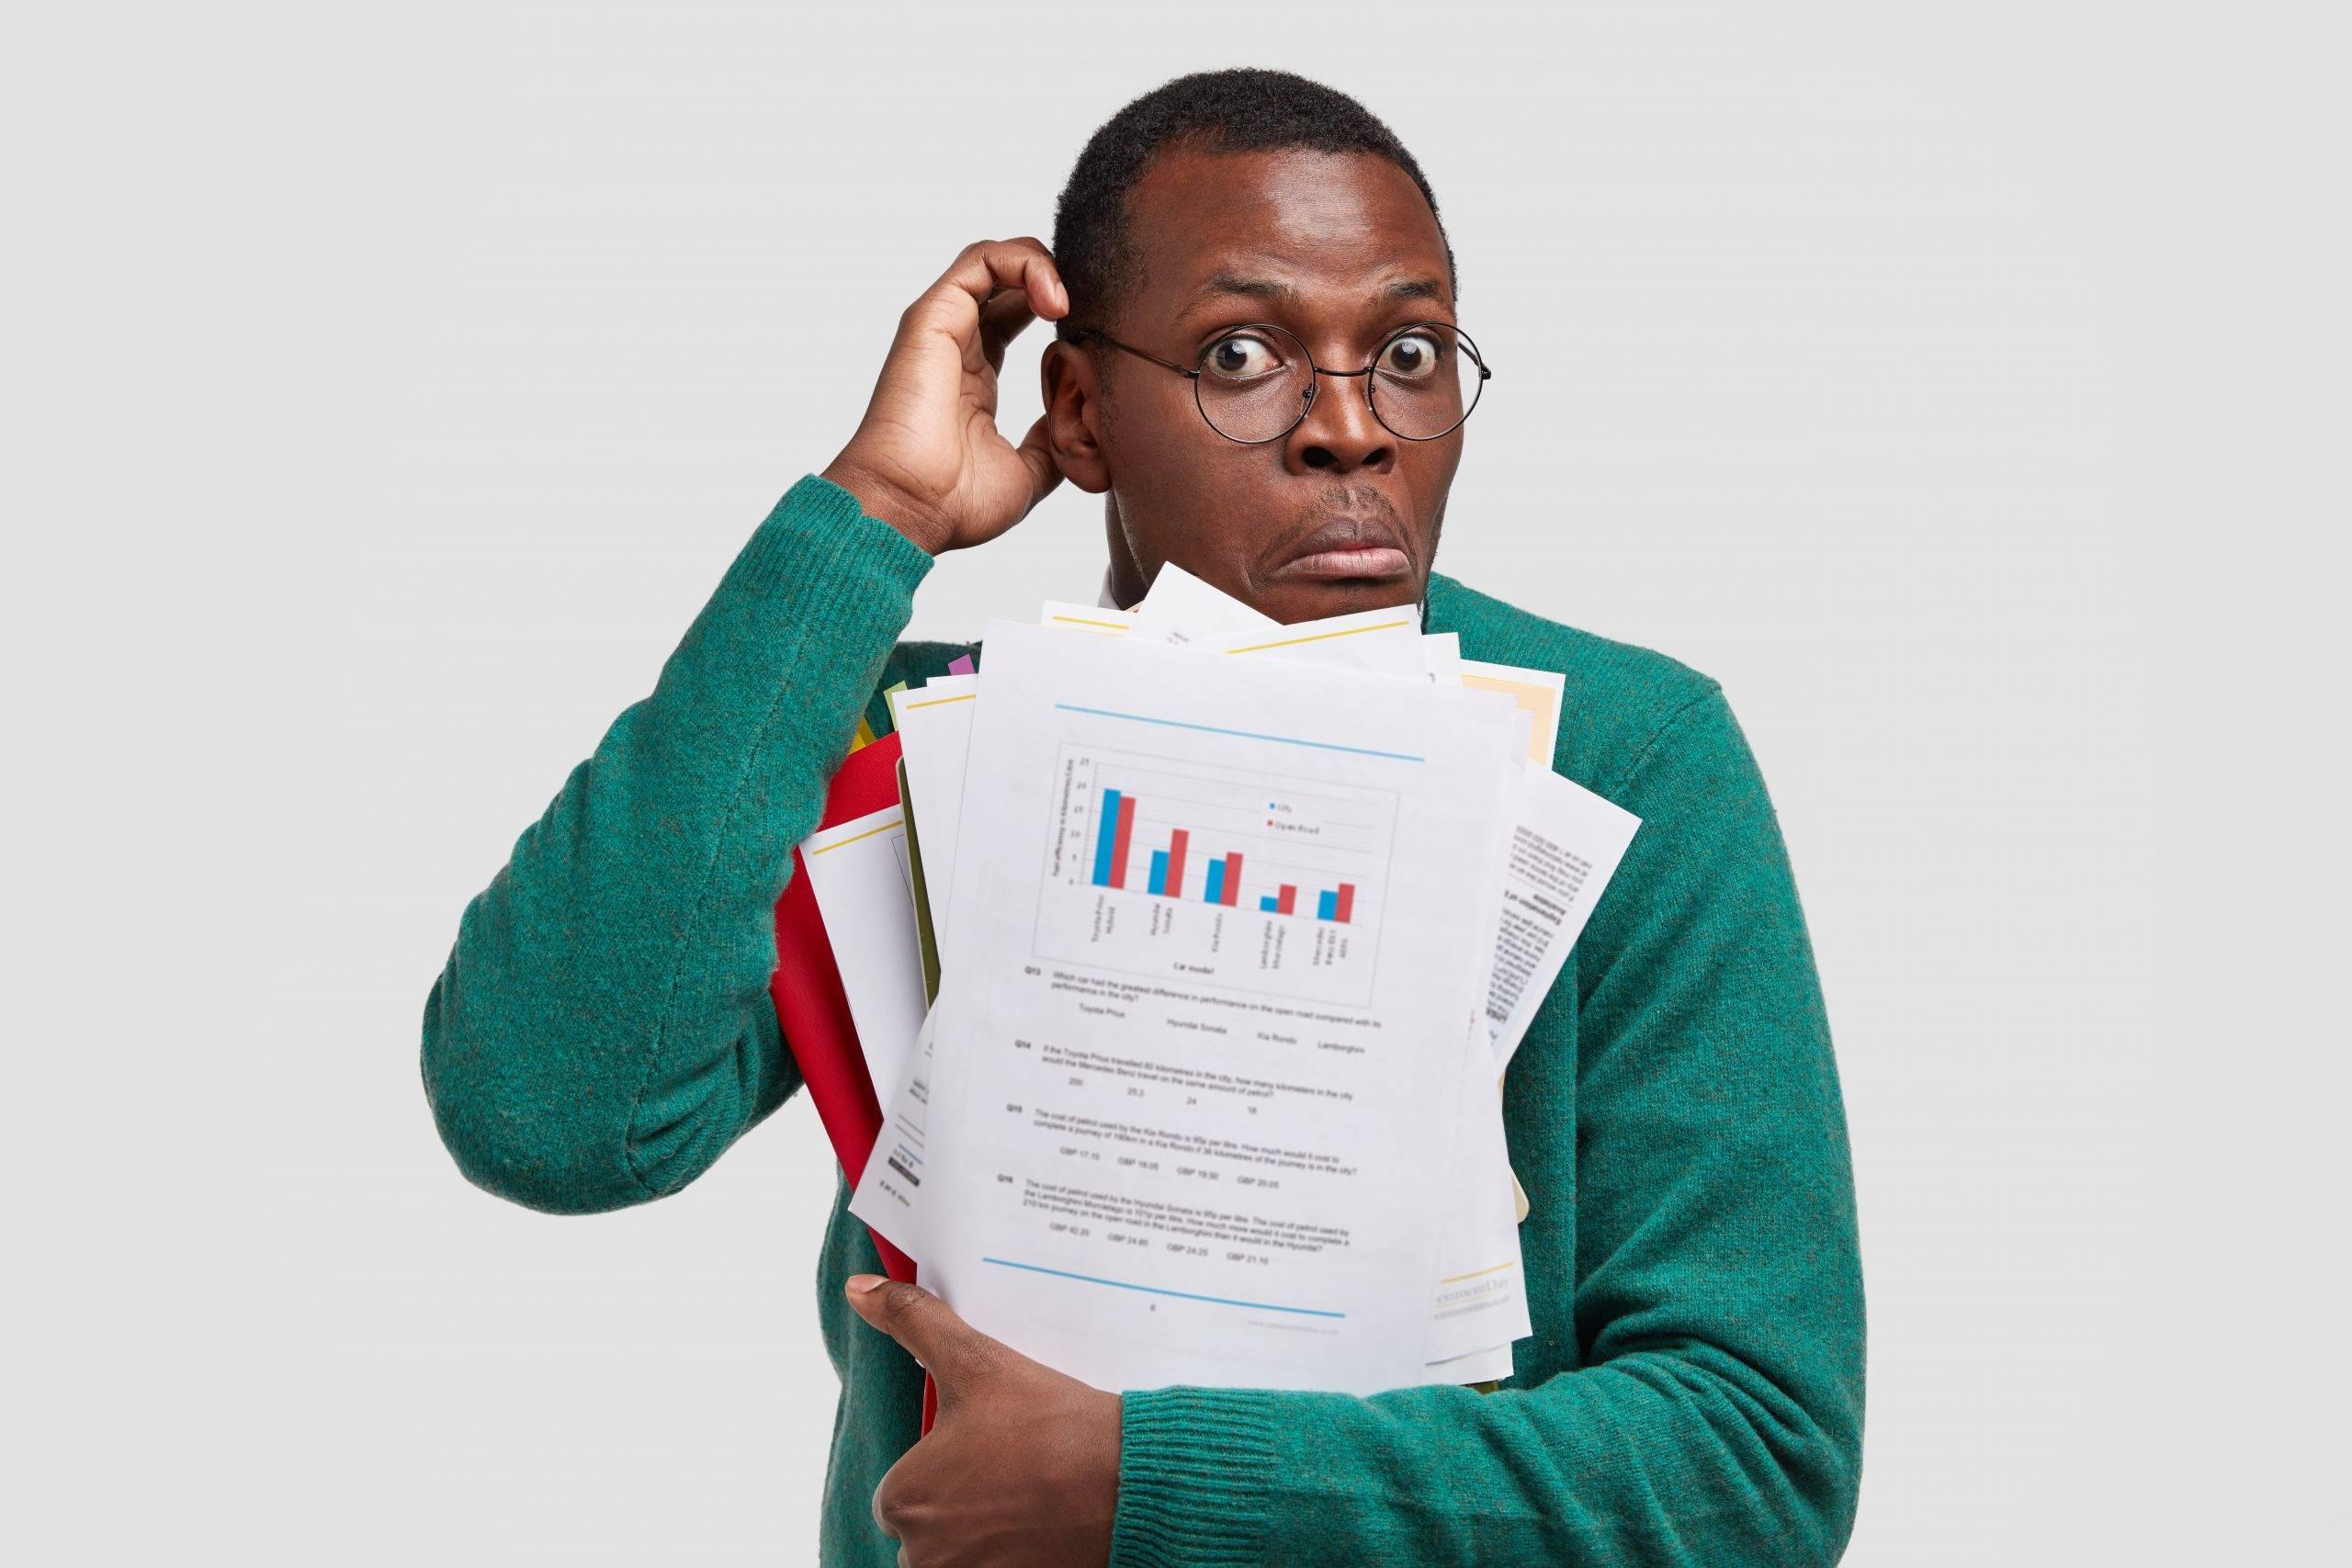 Indecisive black man scratches head, carries papers with data and diagram, feels puzzled as has to prepare financial report, isolated over white wall. Office employee with dark skin holds document